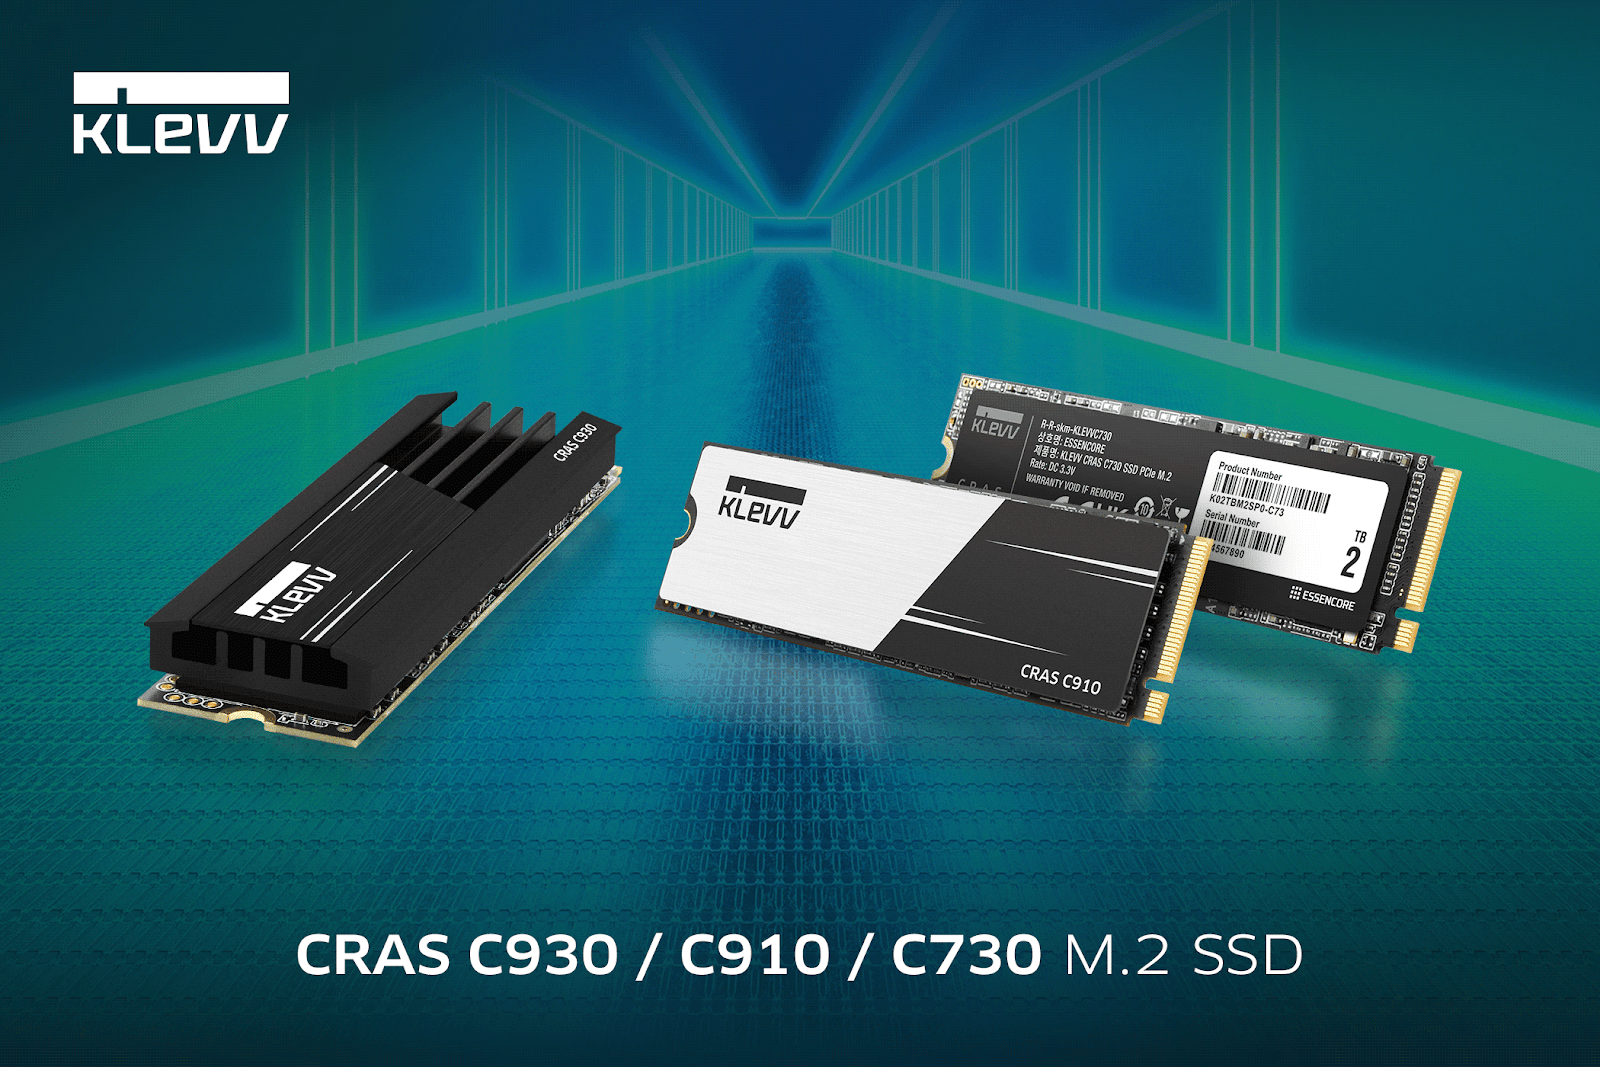 KLEVV introduced 2 new NVMe Gen4 M.2 SSDs with CRAS C930/C910, and reinforced NVMe Gen3 M.2 SSD with CRAS C730